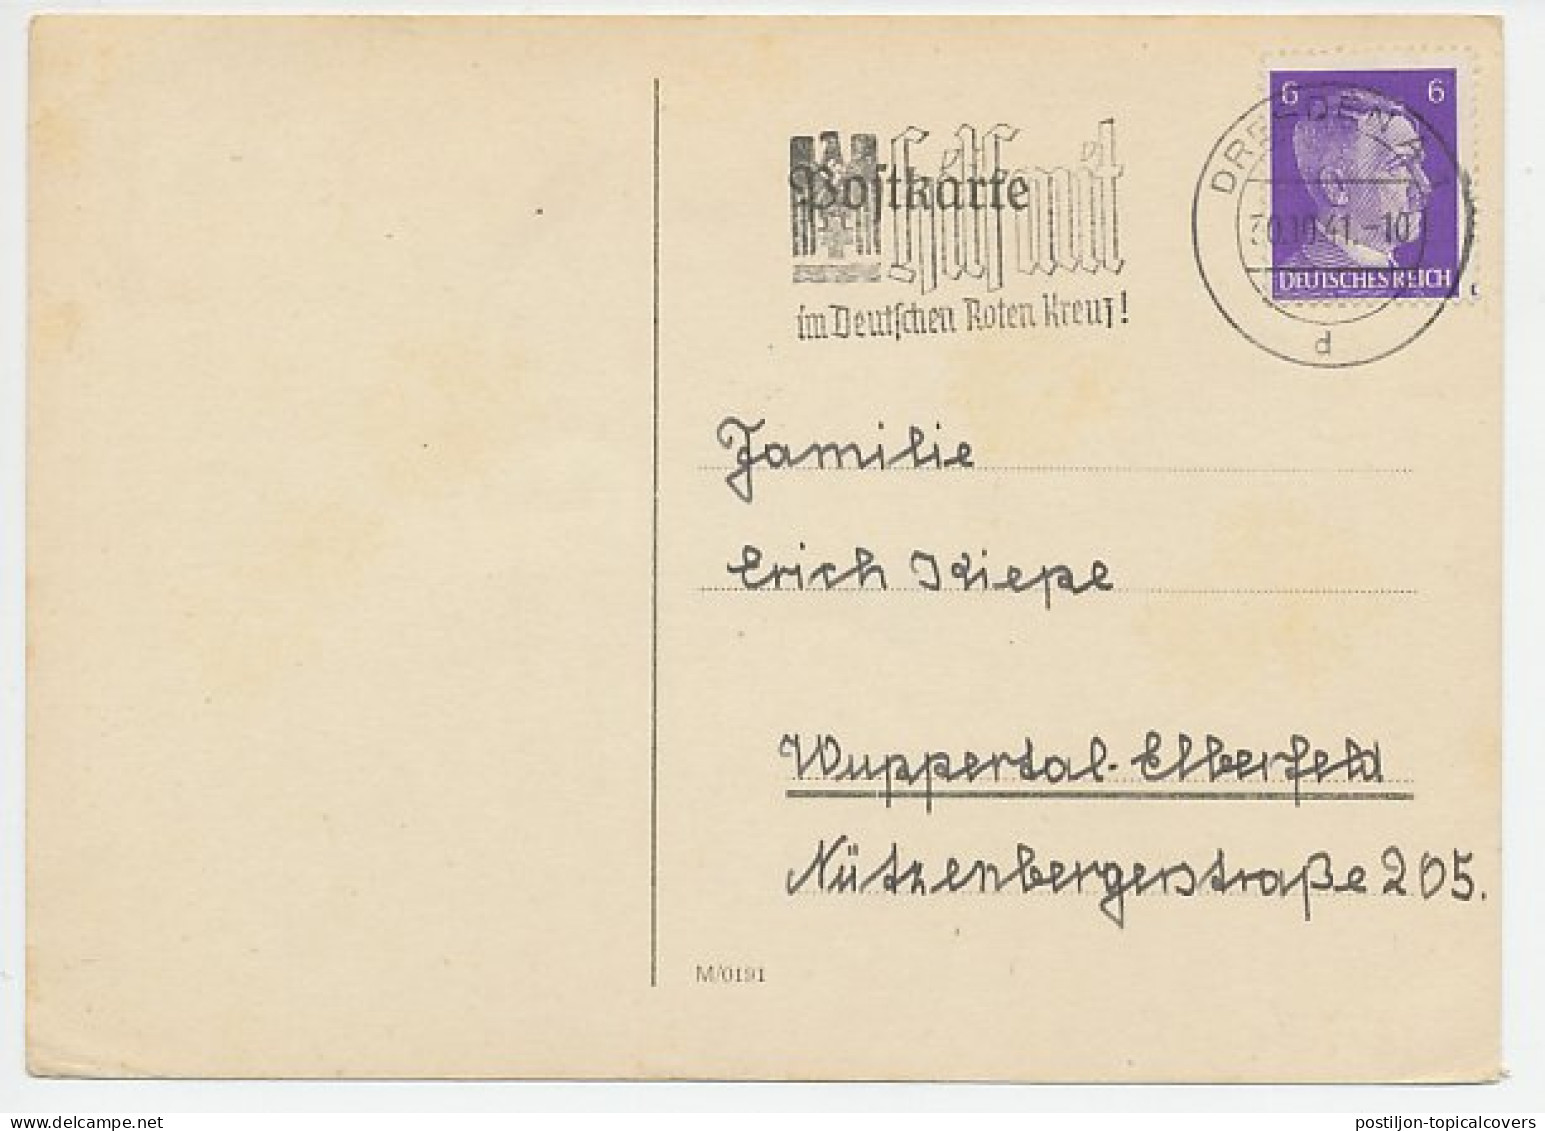 Cover / Postmark Deutsches Reich / Germany 1941 Red Cross - Assist - Rotes Kreuz